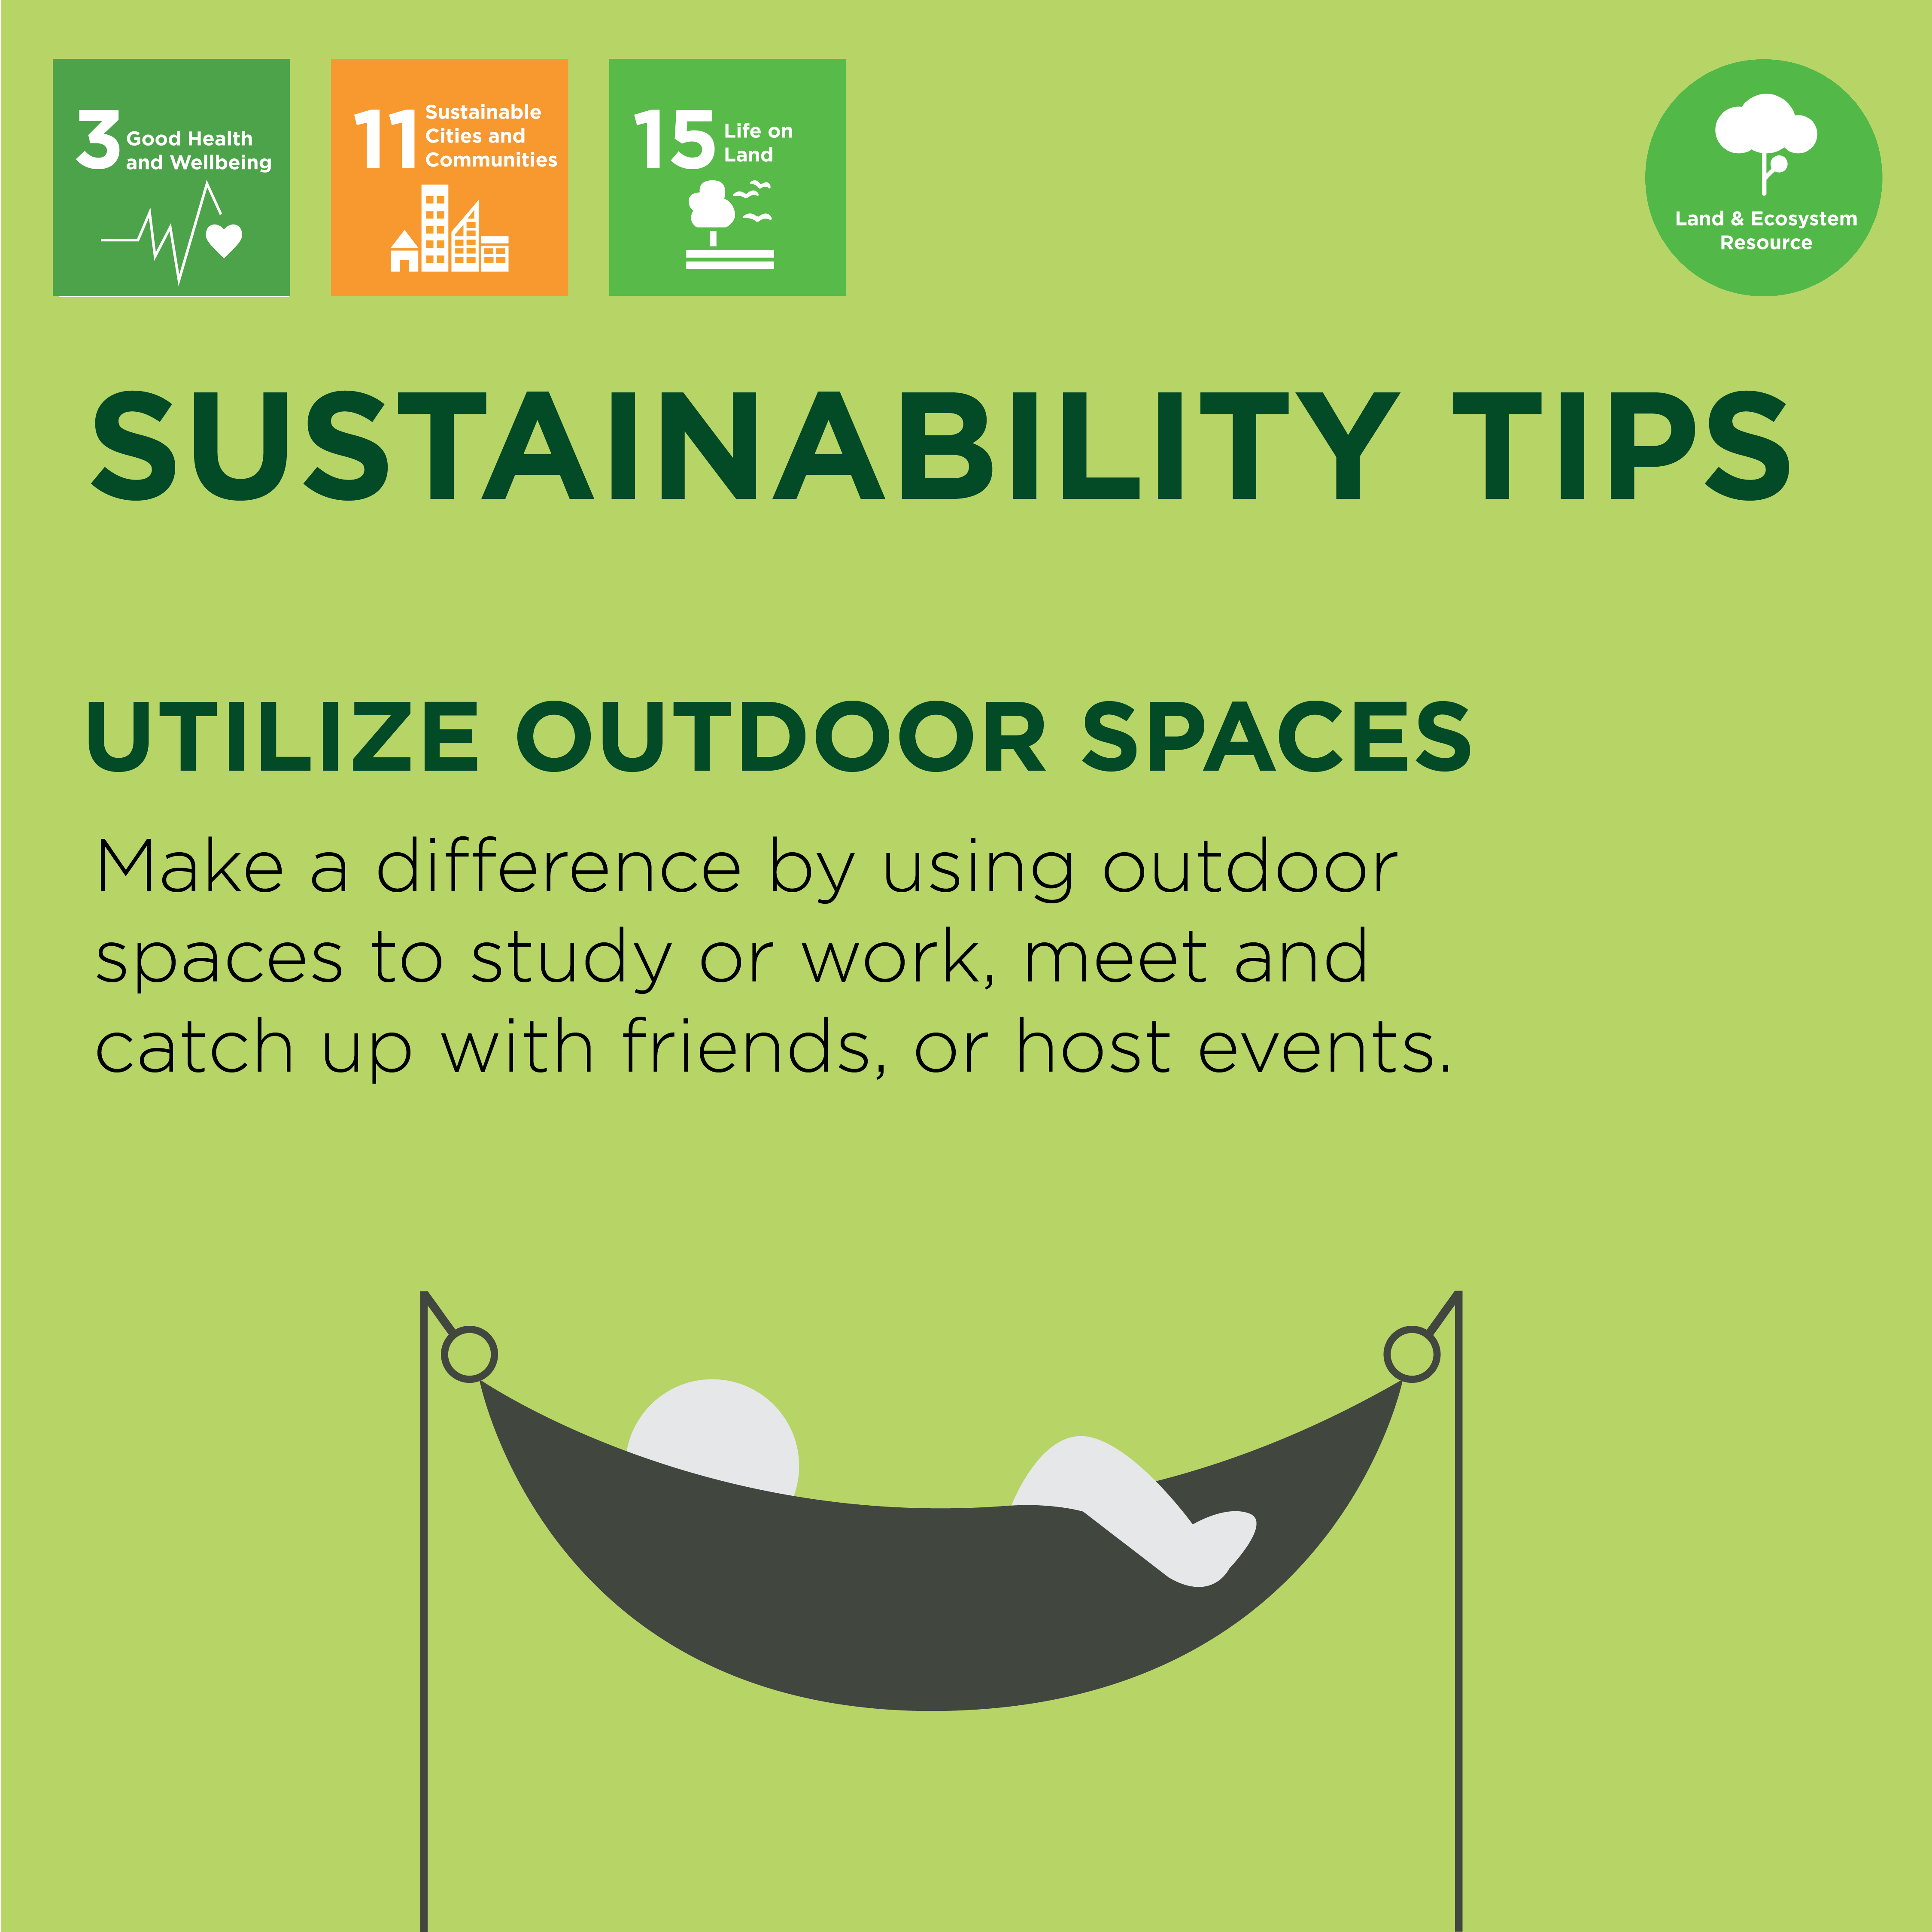 Make a difference by using outdoor spaces to study or work